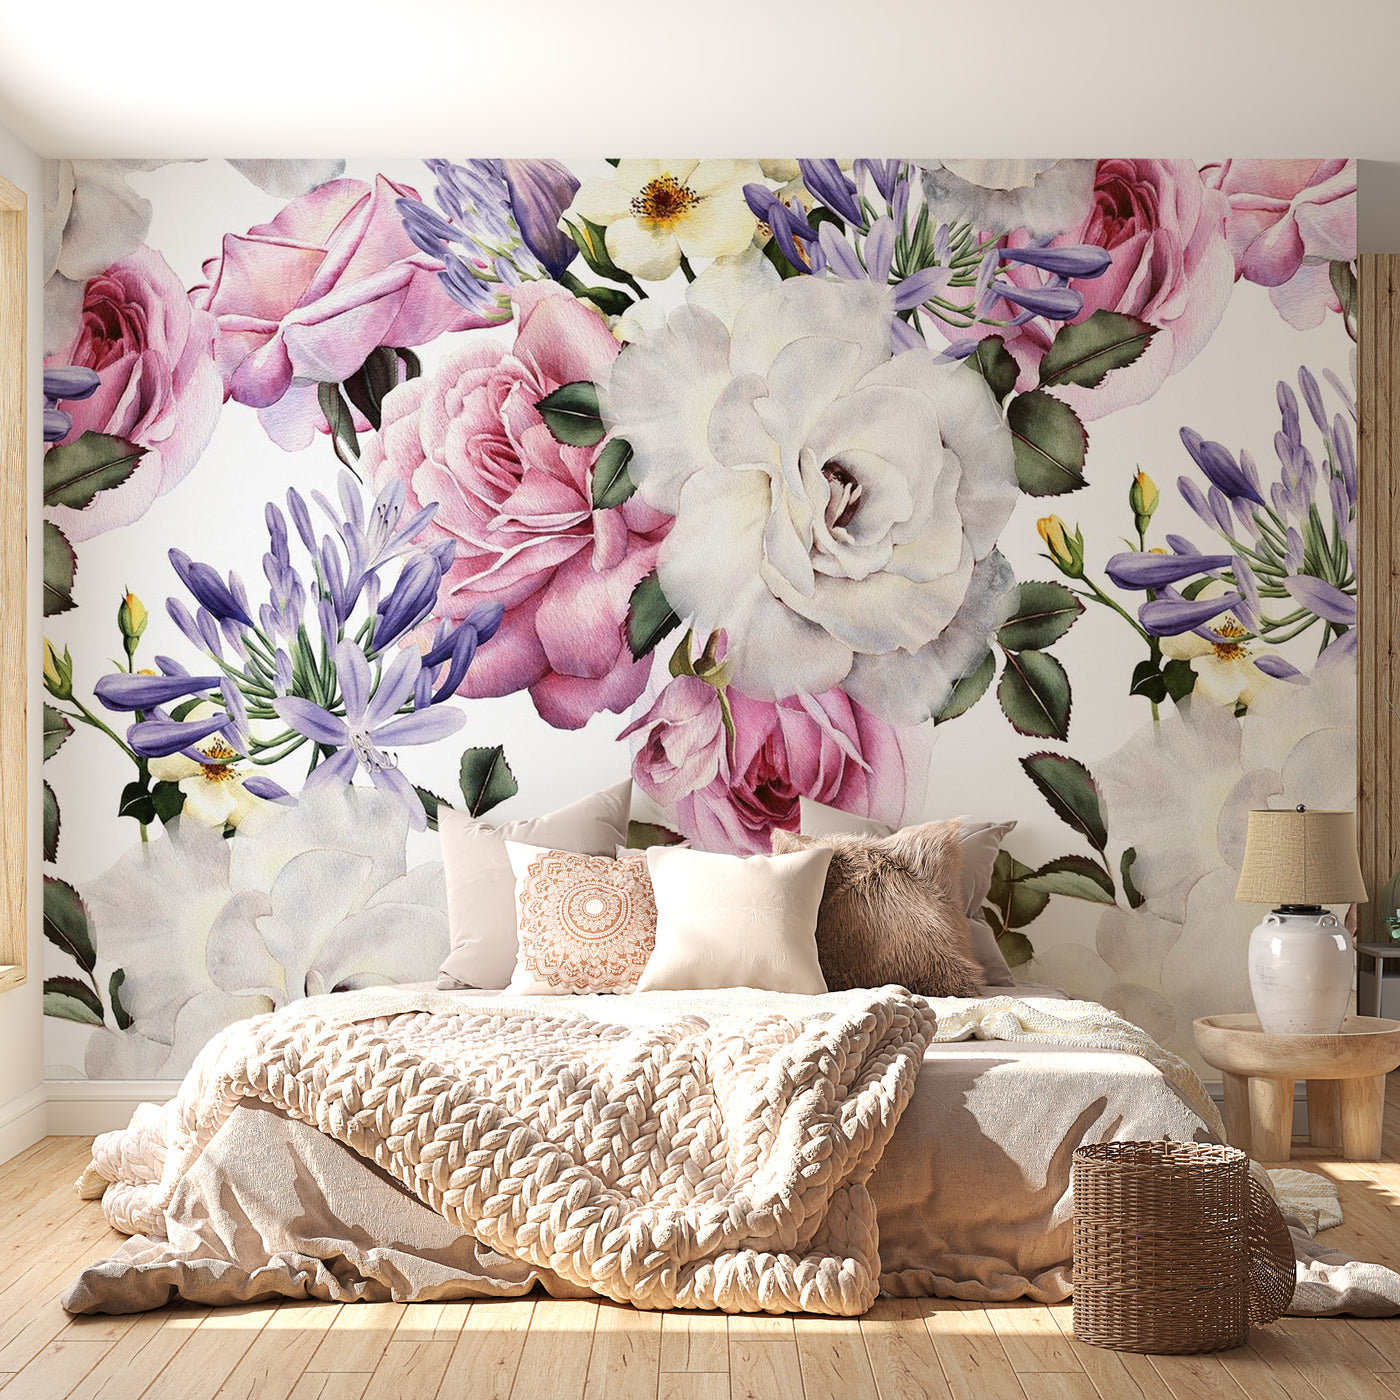 Peel & Stick Floral Wall Mural - Flowers On White Background - Removable Wall Decals